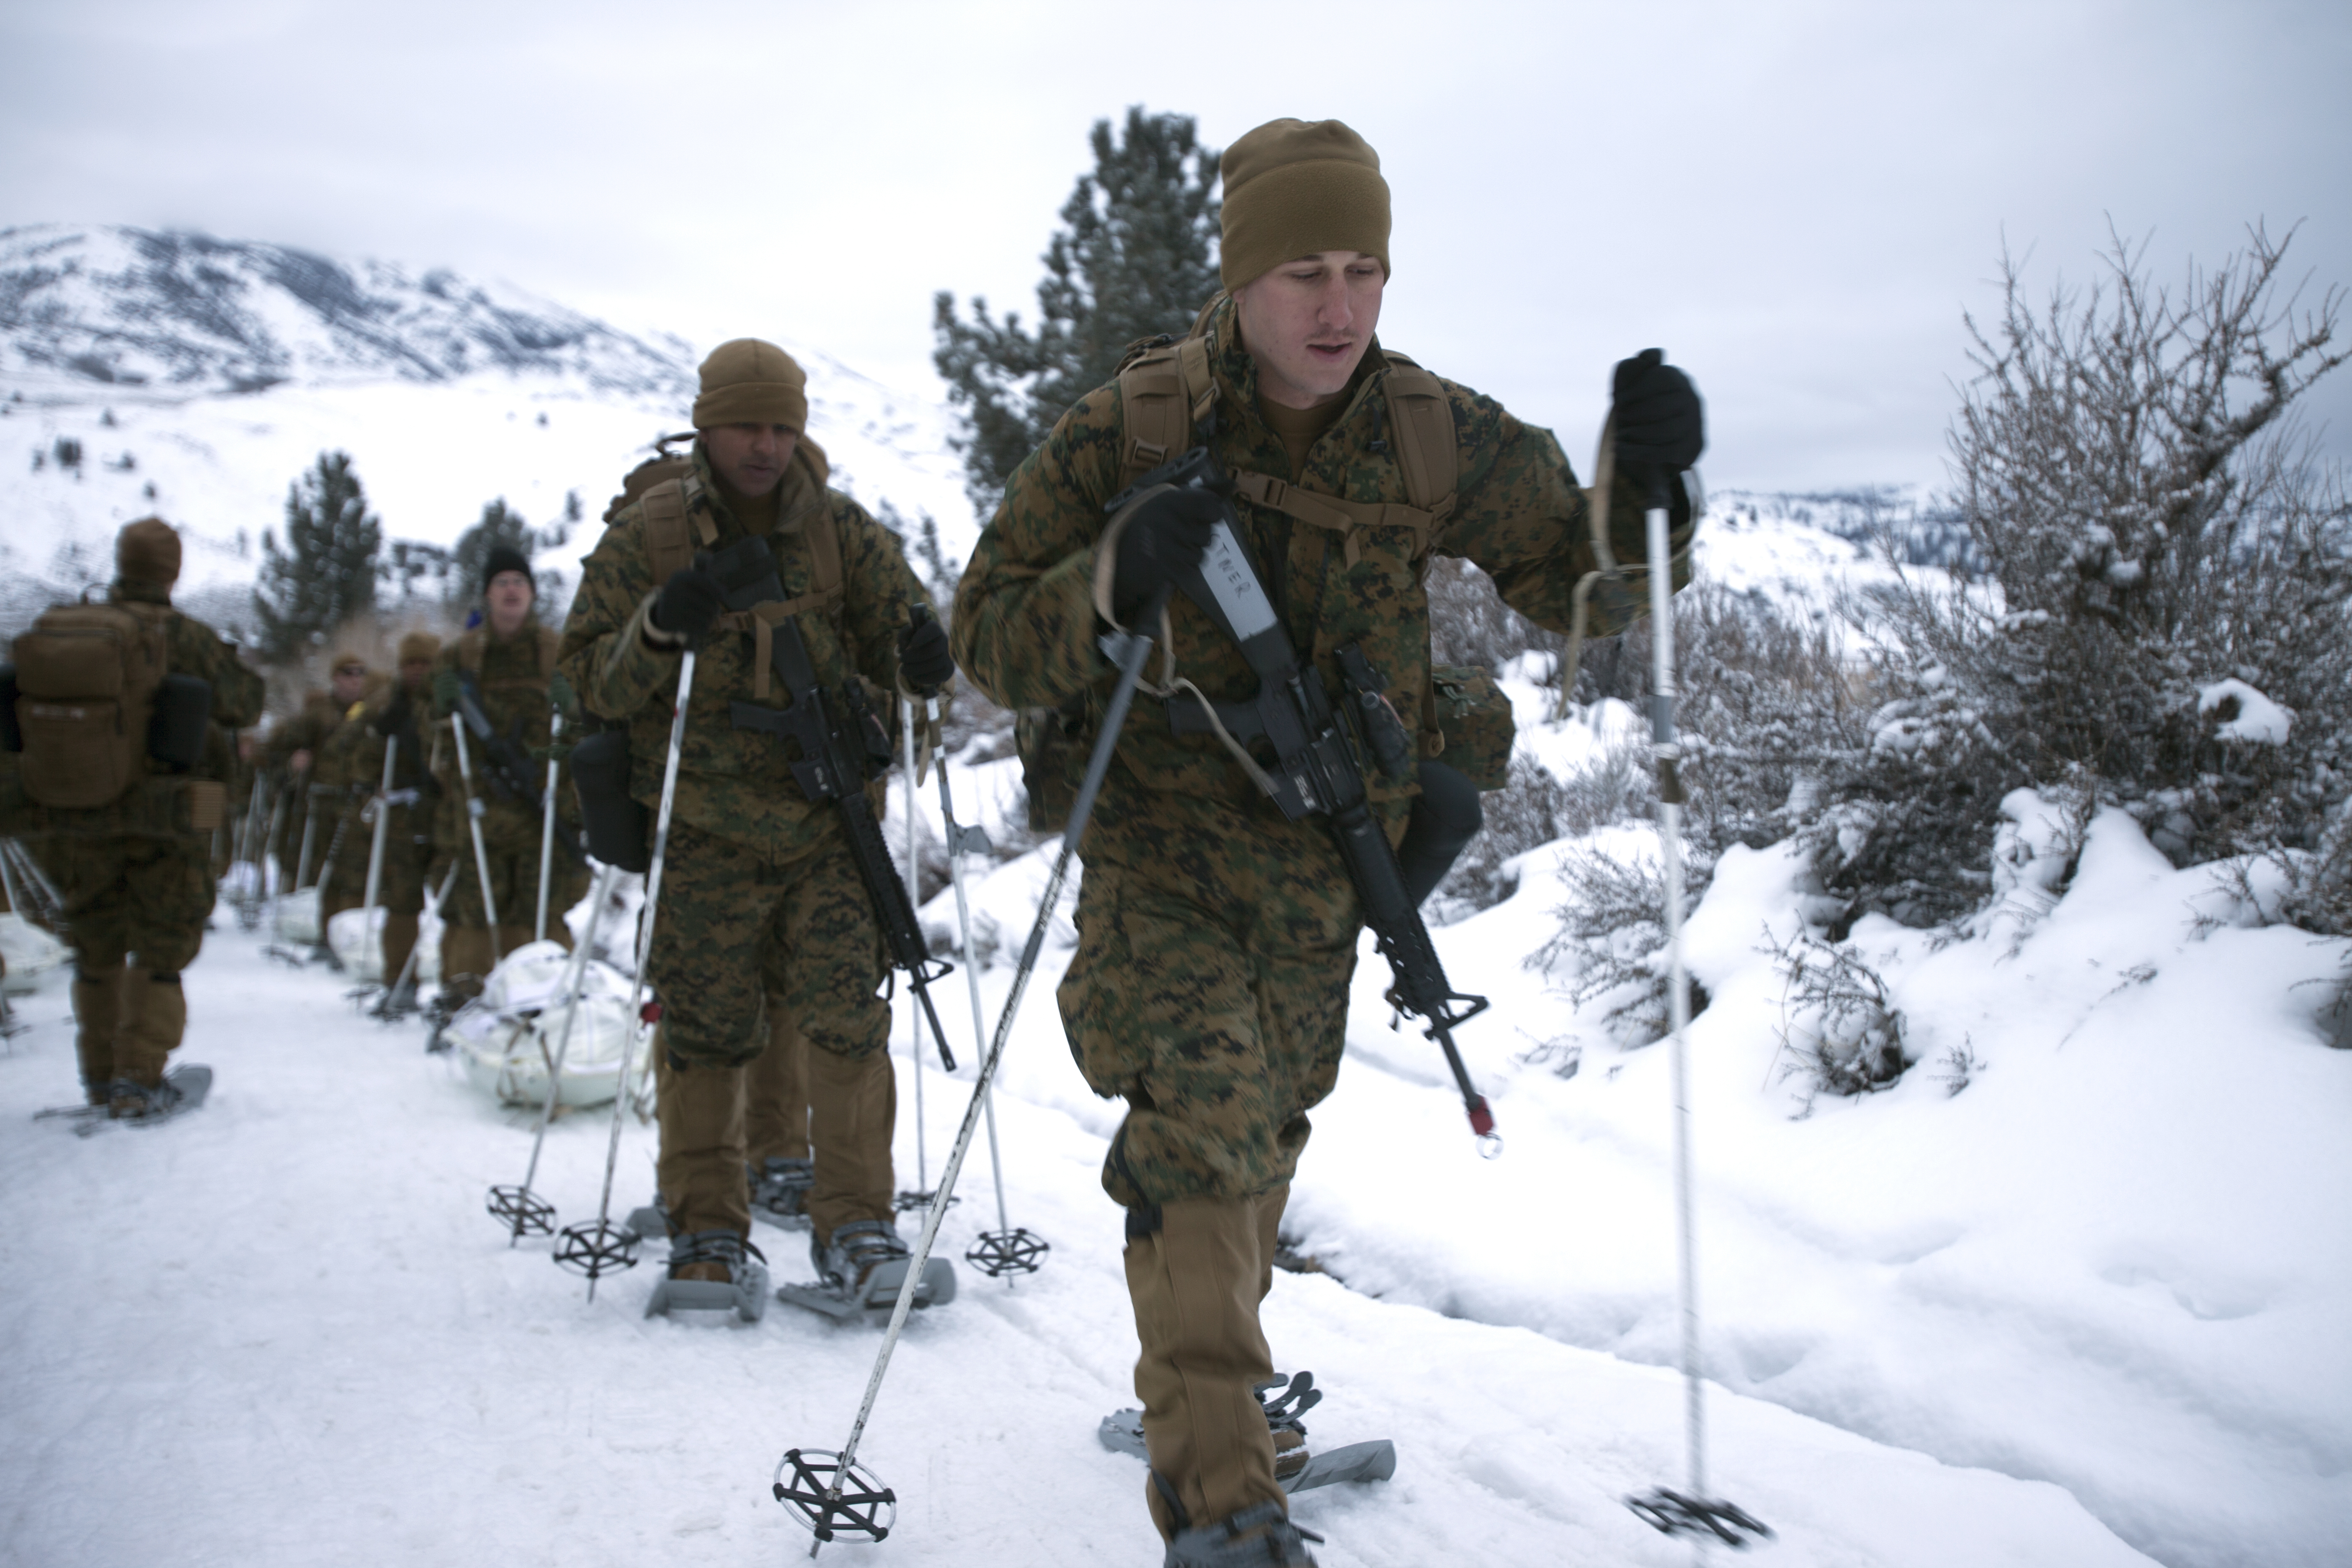 Cpl. Tyler D. Castner leads Marines up a mountain during cold weather training at Marine Corps Mountain Warfare Training Center, Calif. on Jan. 21, 2016. US Marine Corps Photo